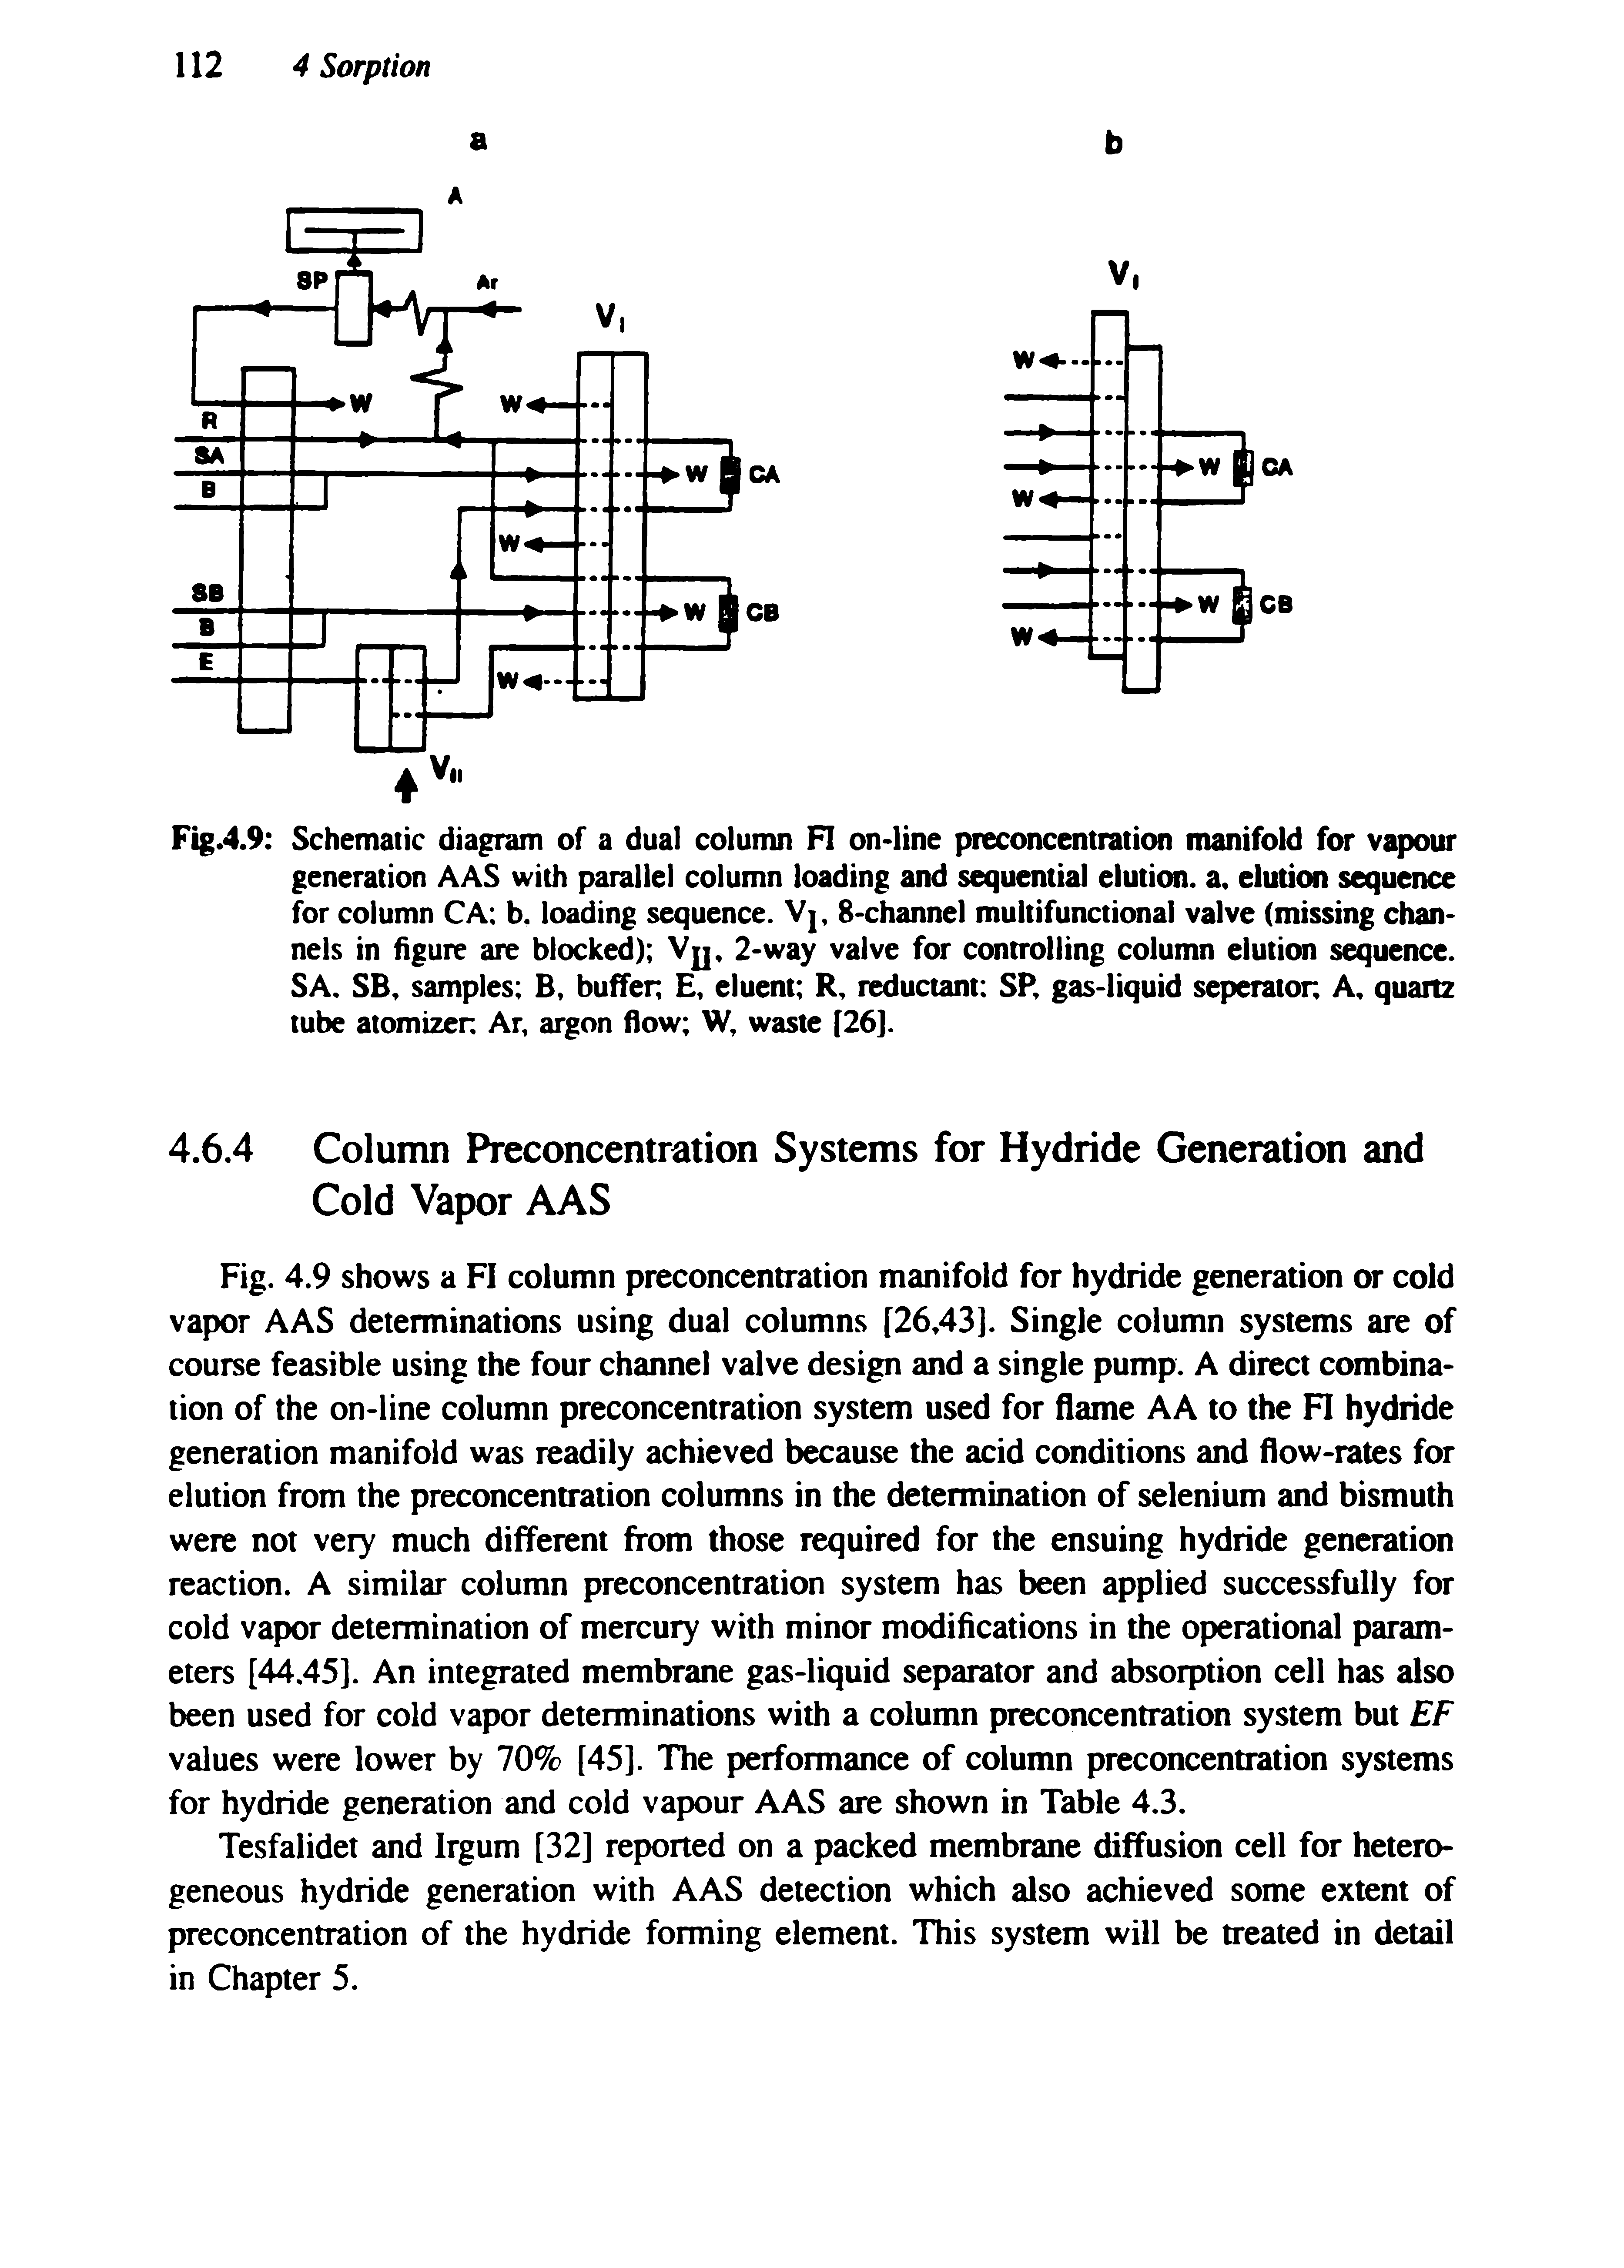 Fig.4.9 Schematic diagram of a dual column FI on-line preconcentration manifold for vapour generation AAS with parallel column loading and sequential elution, a, elution sequence for column CA b. loading sequence. V, 8-channel multifunctional valve (missing channels in figure are blocked) Vjj, 2-way valve for controlling column elution sequence. SA. SB, samples B, buffer, E, eluent R, reductant SP, gas-liquid seperator. A, quaitz tube atomizer. Ar, argon flow W, waste [26].